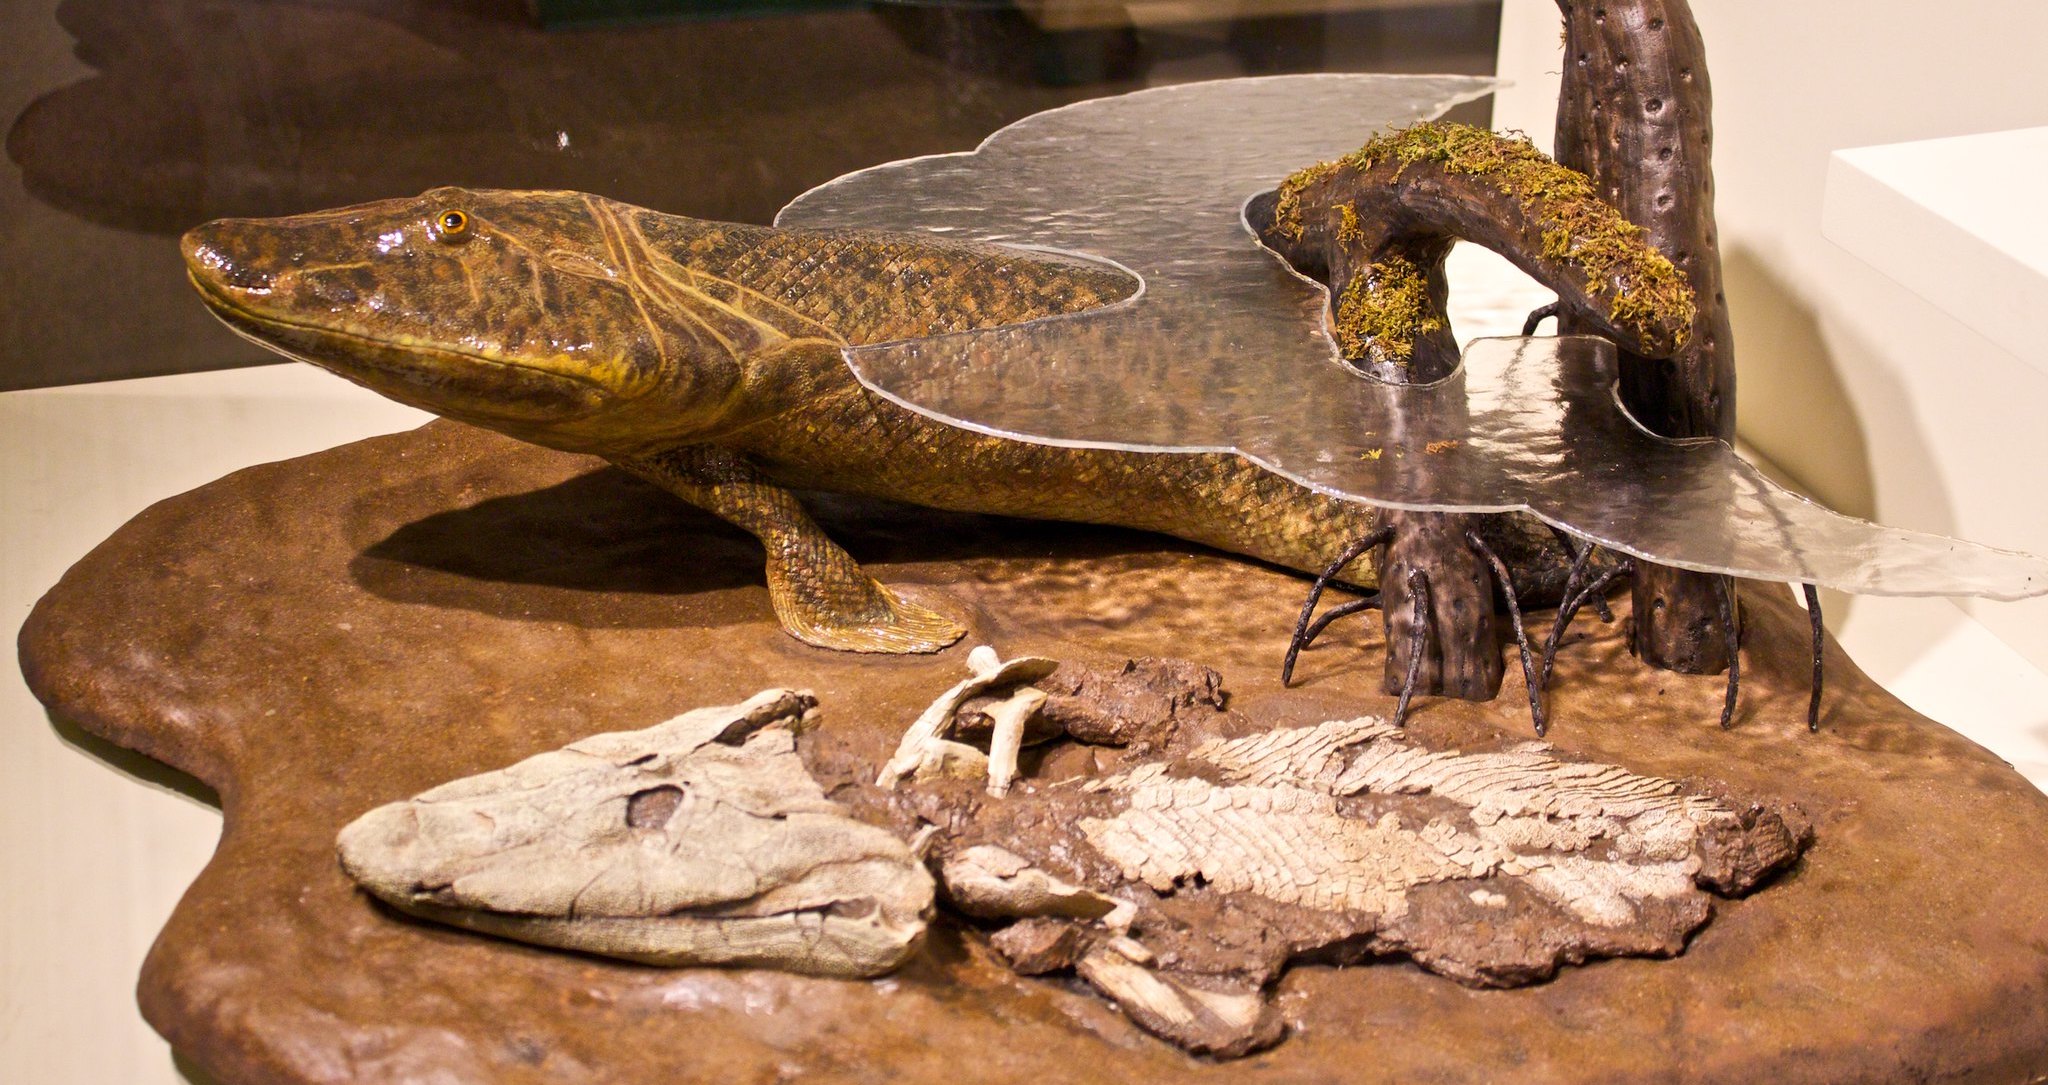 *Tiktaalik roseae*, artist reconstruction and cast of the fossil as displayed at The Harvard Museum of Natural History. Photo by [Maggie](https://www.flickr.com/photos/tankgrrl/4665662106), [CC BY-NC-ND 2.0](https://creativecommons.org/licenses/by-nc-nd/2.0/).